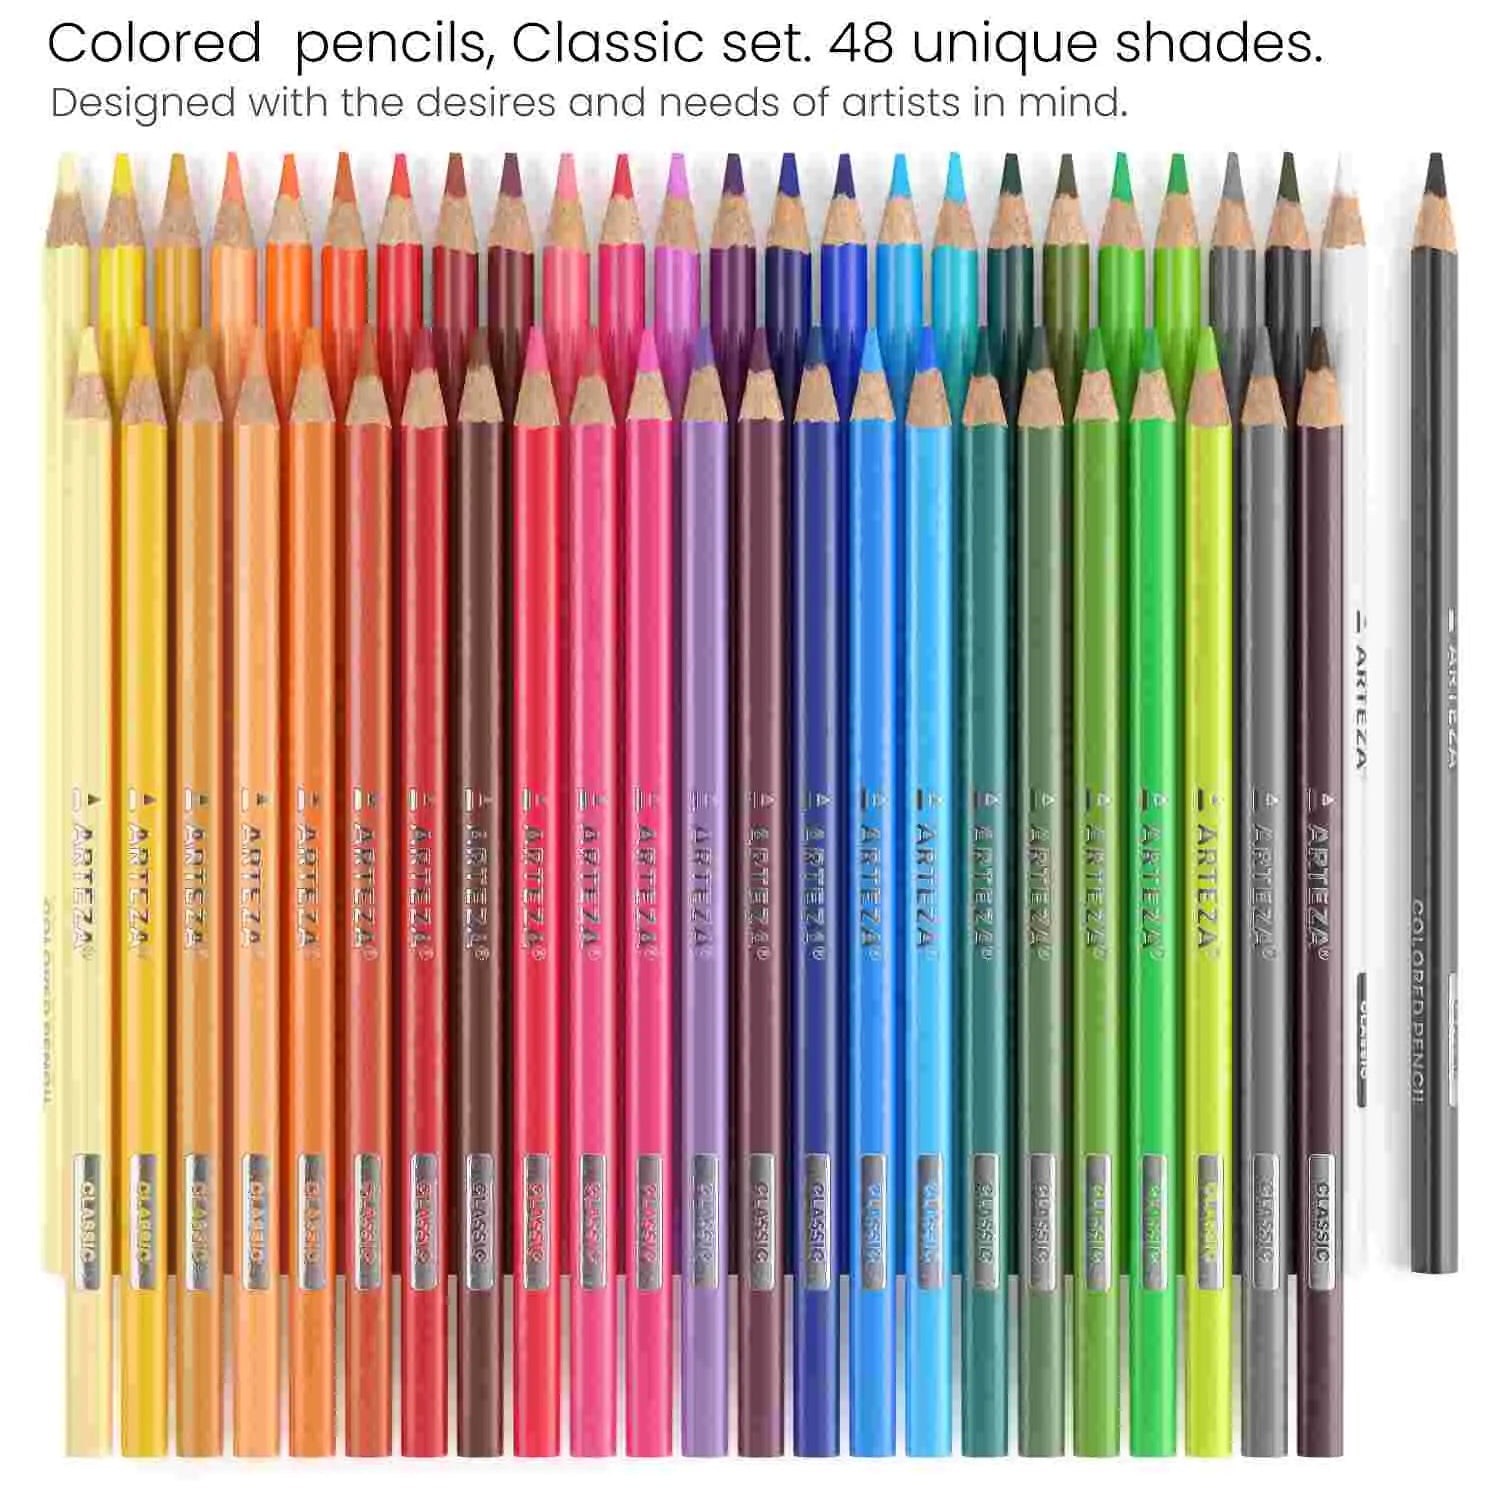 https://canvazo.com/cdn/shop/files/ARTEZA-Colored-Pencils-for-Adult-Coloring_-48-Colors_-Soft-Drawing-Pencils_-Highly-Pigmented_-Wax-Based-Core_-Professional-Art-Supplies-for-Artists_-Pencil-Set-for-Adults-and-Teens-Ar.jpg?v=1695380930